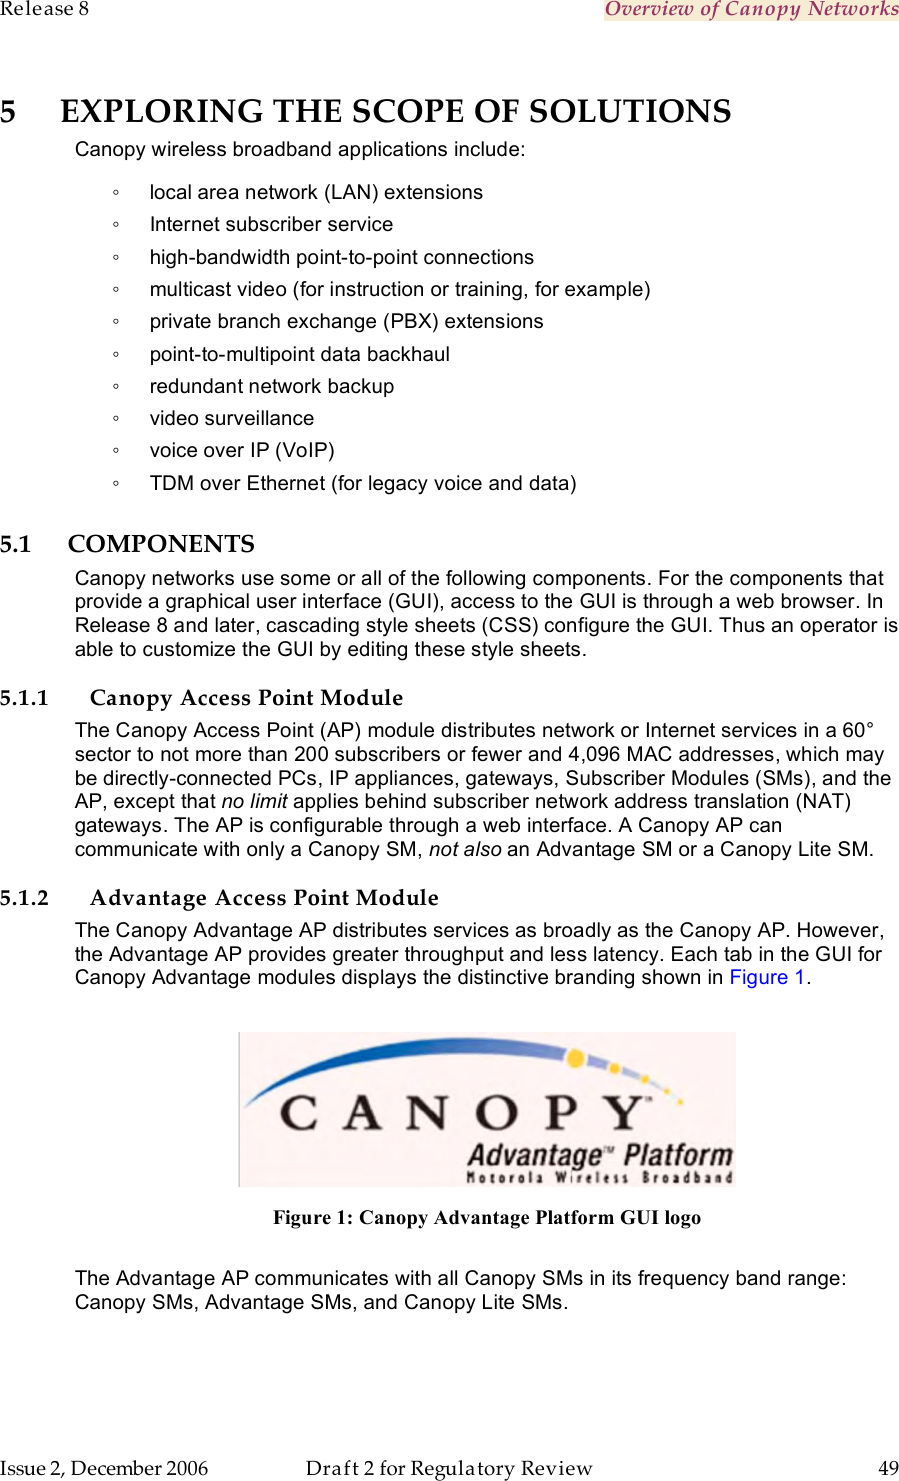 Release 8    Overview of Canopy Networks                  March 200                  Through Software Release 6.   Issue 2, December 2006  Draft 2 for Regulatory Review  49     5 EXPLORING THE SCOPE OF SOLUTIONS Canopy wireless broadband applications include: ◦  local area network (LAN) extensions ◦  Internet subscriber service ◦  high-bandwidth point-to-point connections ◦  multicast video (for instruction or training, for example) ◦  private branch exchange (PBX) extensions ◦  point-to-multipoint data backhaul ◦  redundant network backup ◦  video surveillance ◦  voice over IP (VoIP) ◦  TDM over Ethernet (for legacy voice and data) 5.1 COMPONENTS Canopy networks use some or all of the following components. For the components that provide a graphical user interface (GUI), access to the GUI is through a web browser. In Release 8 and later, cascading style sheets (CSS) configure the GUI. Thus an operator is able to customize the GUI by editing these style sheets. 5.1.1 Canopy Access Point Module The Canopy Access Point (AP) module distributes network or Internet services in a 60° sector to not more than 200 subscribers or fewer and 4,096 MAC addresses, which may be directly-connected PCs, IP appliances, gateways, Subscriber Modules (SMs), and the AP, except that no limit applies behind subscriber network address translation (NAT) gateways. The AP is configurable through a web interface. A Canopy AP can communicate with only a Canopy SM, not also an Advantage SM or a Canopy Lite SM. 5.1.2 Advantage Access Point Module The Canopy Advantage AP distributes services as broadly as the Canopy AP. However, the Advantage AP provides greater throughput and less latency. Each tab in the GUI for Canopy Advantage modules displays the distinctive branding shown in Figure 1.   Figure 1: Canopy Advantage Platform GUI logo  The Advantage AP communicates with all Canopy SMs in its frequency band range: Canopy SMs, Advantage SMs, and Canopy Lite SMs.  